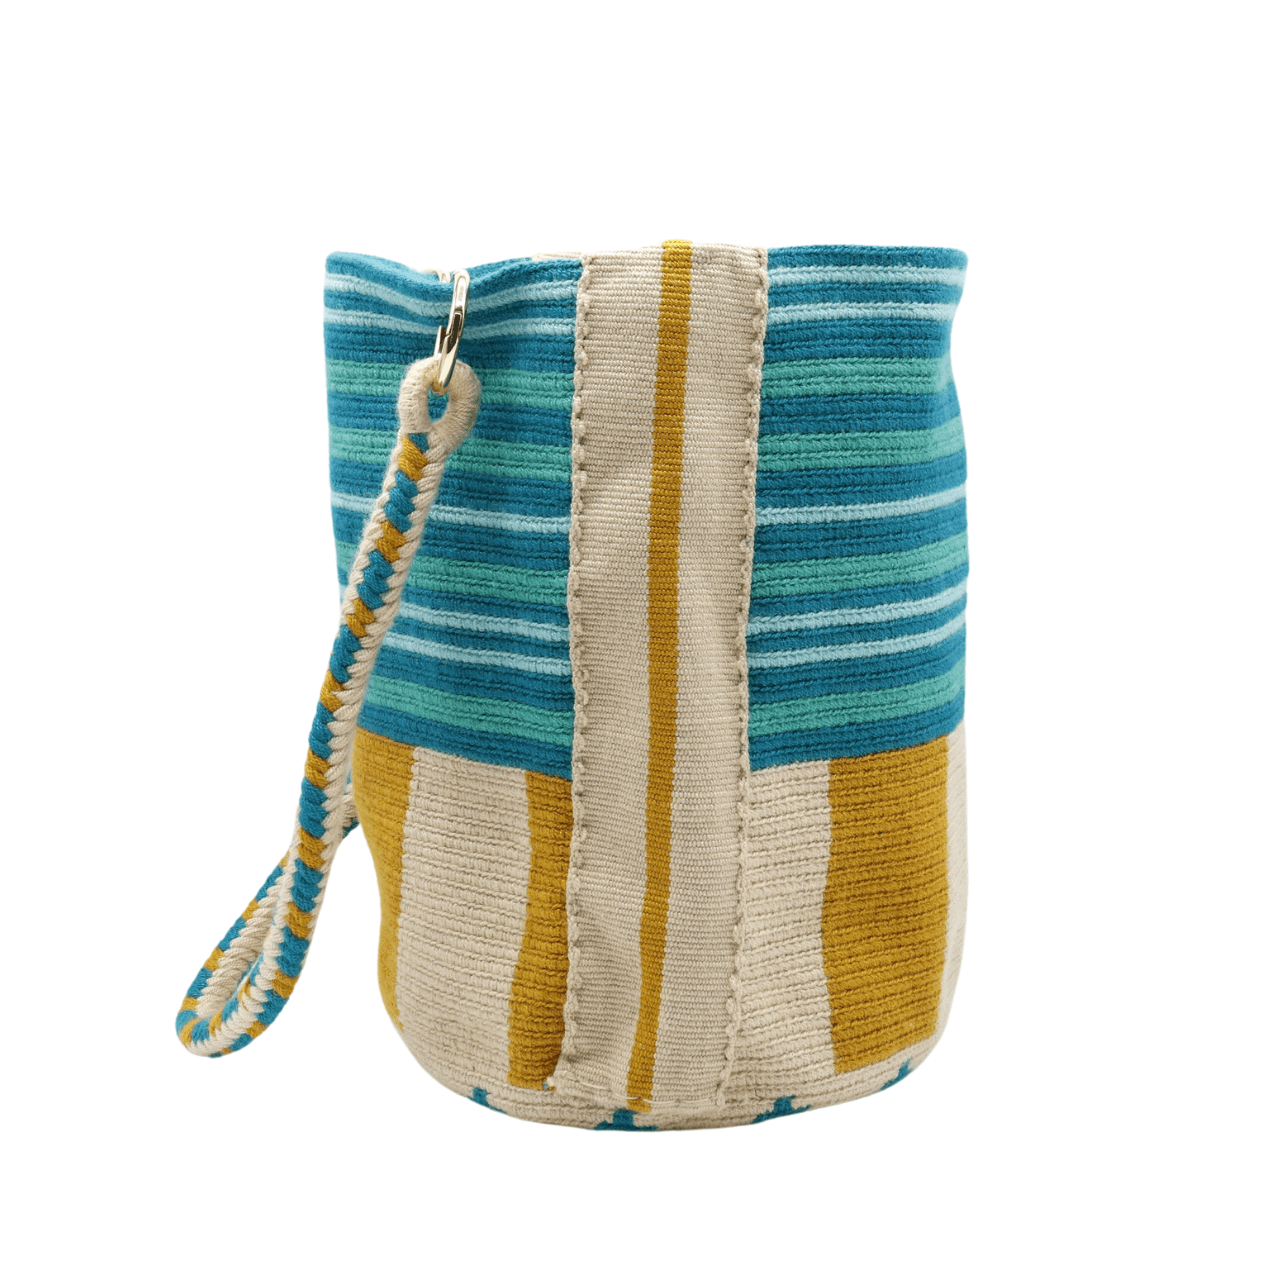 Chic and stylish crochet tote bag in mixed blues and yellows, featuring a shoulder strap and braided handle for versatility and flair.